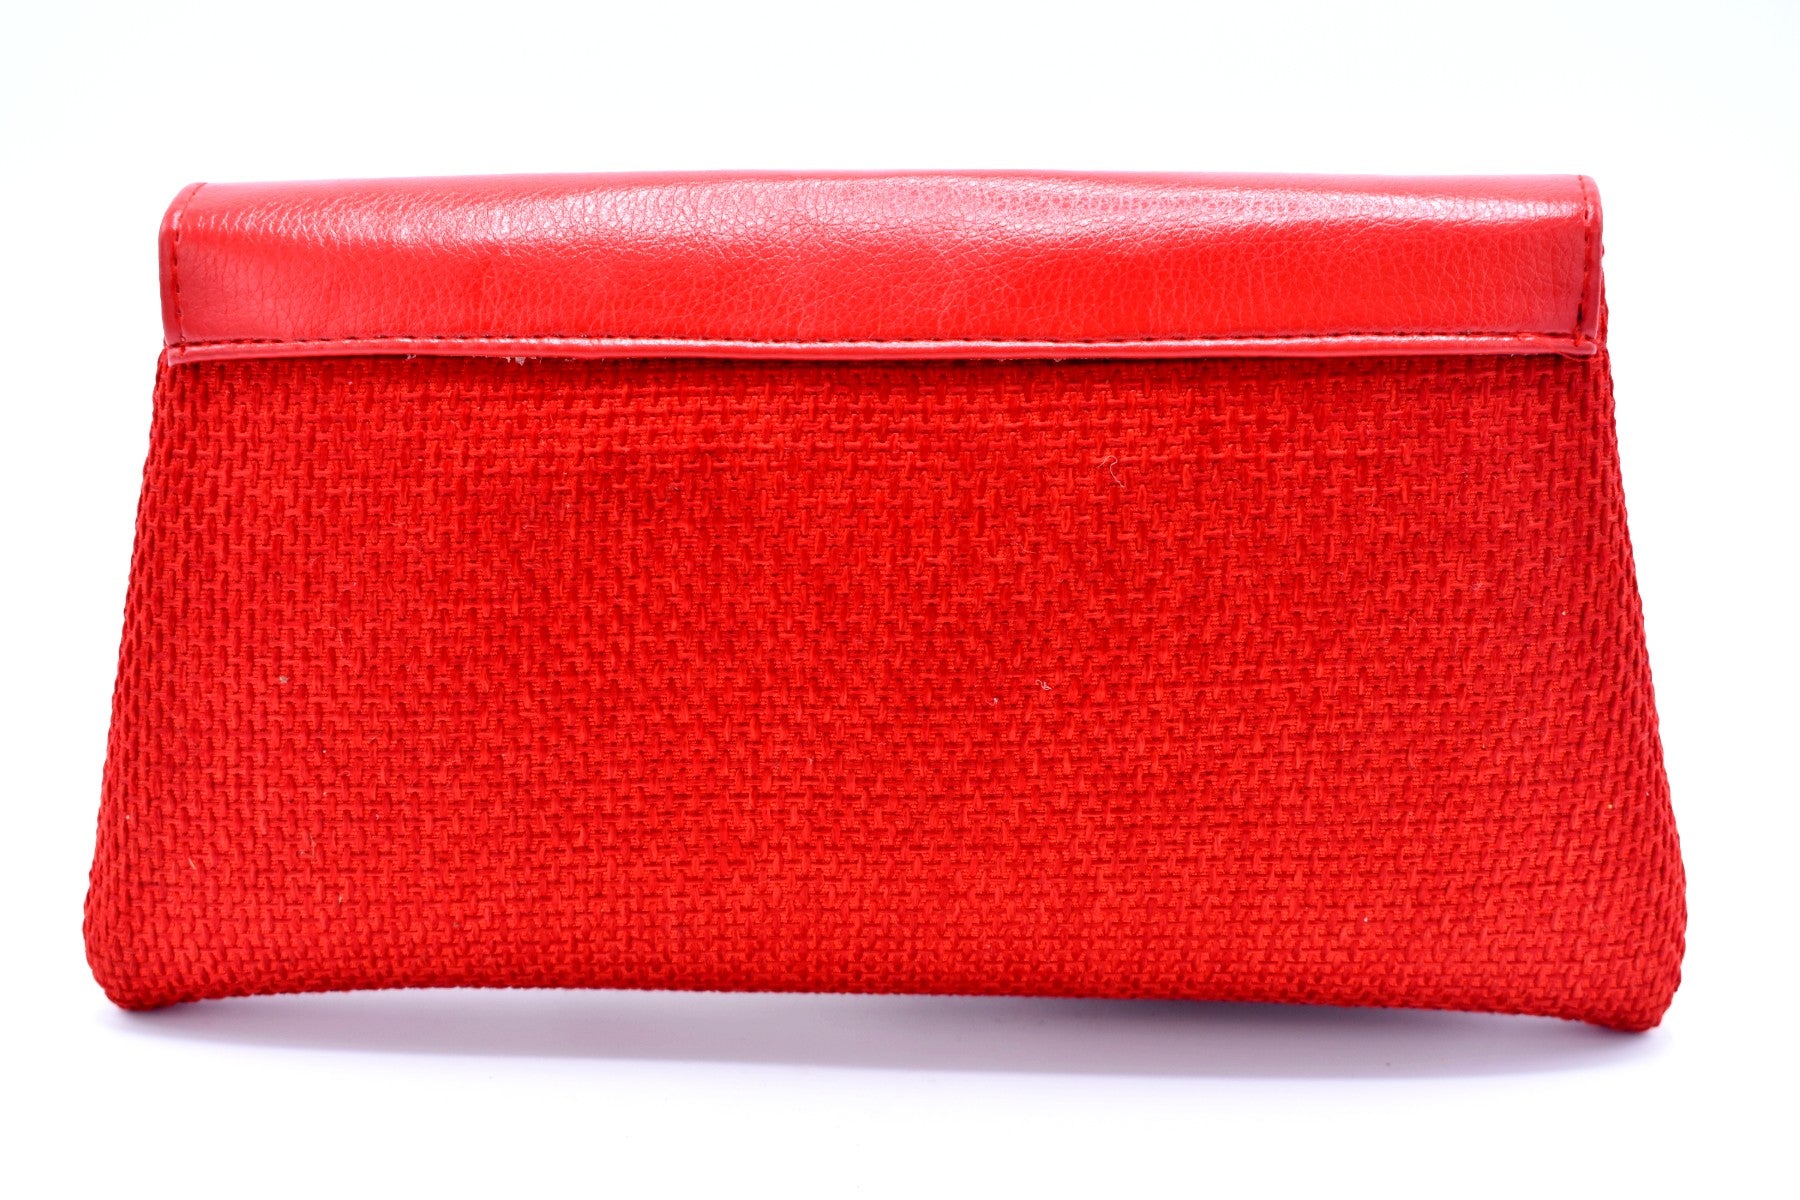 New! Poketo Red Curve Vegan Leather Clutch Purse With Wrist Strap At  Domestica — Domestica | Indie Handmade Gifts